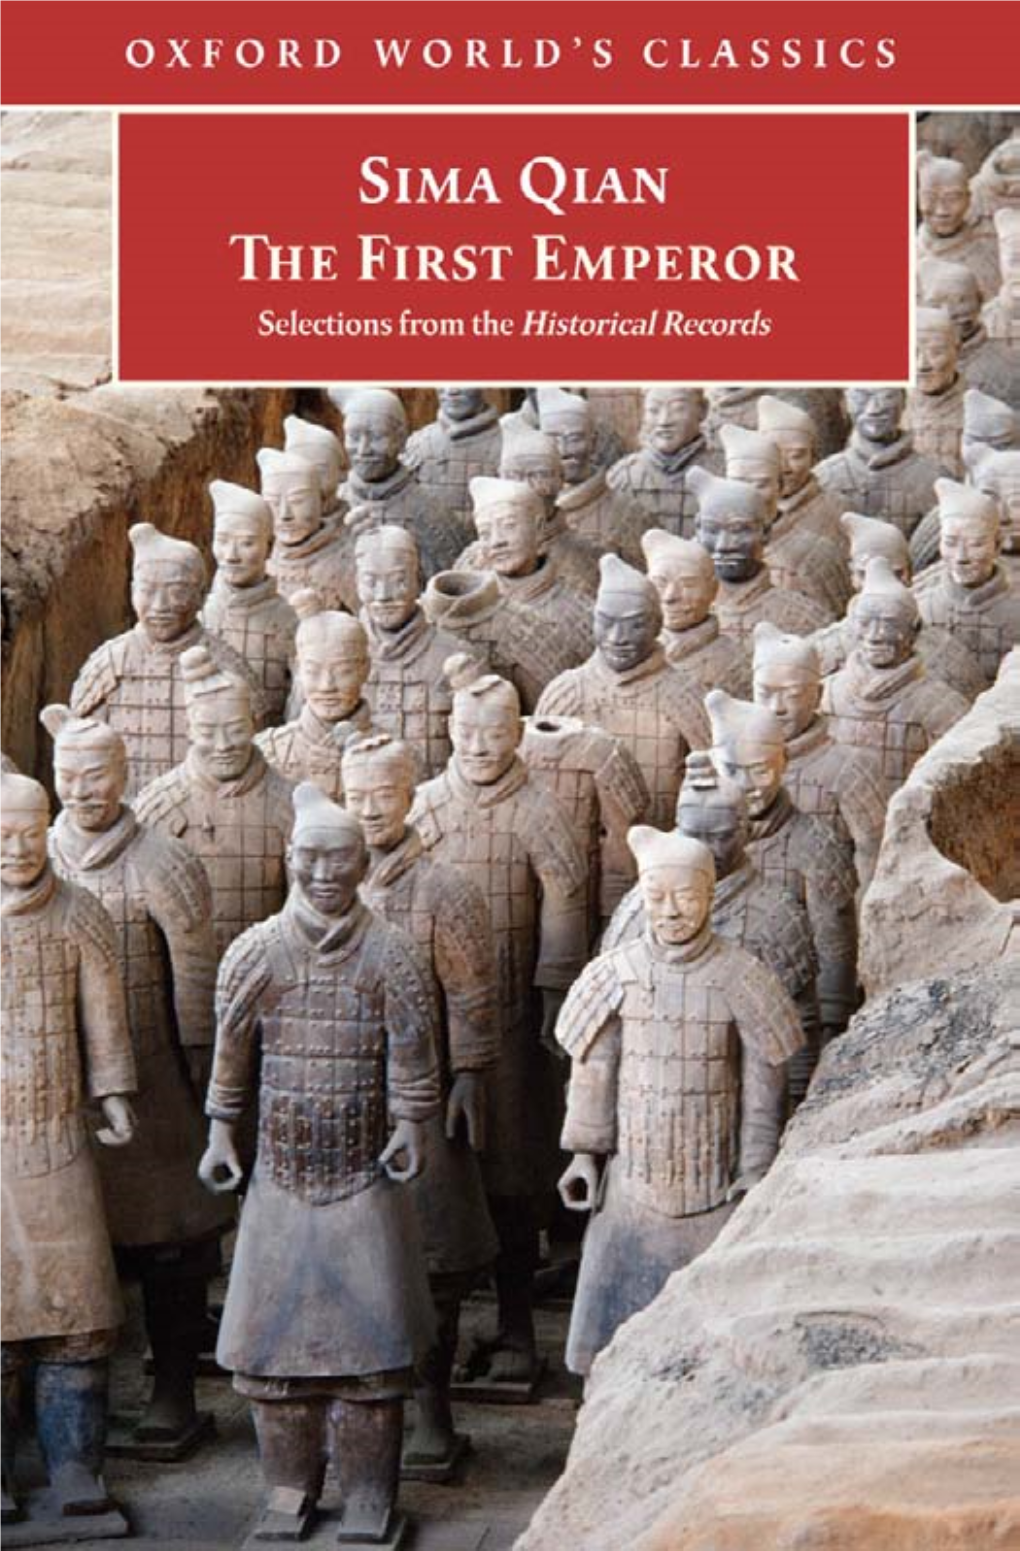 The First Emperor: Selections from the Historical Records (Oxford